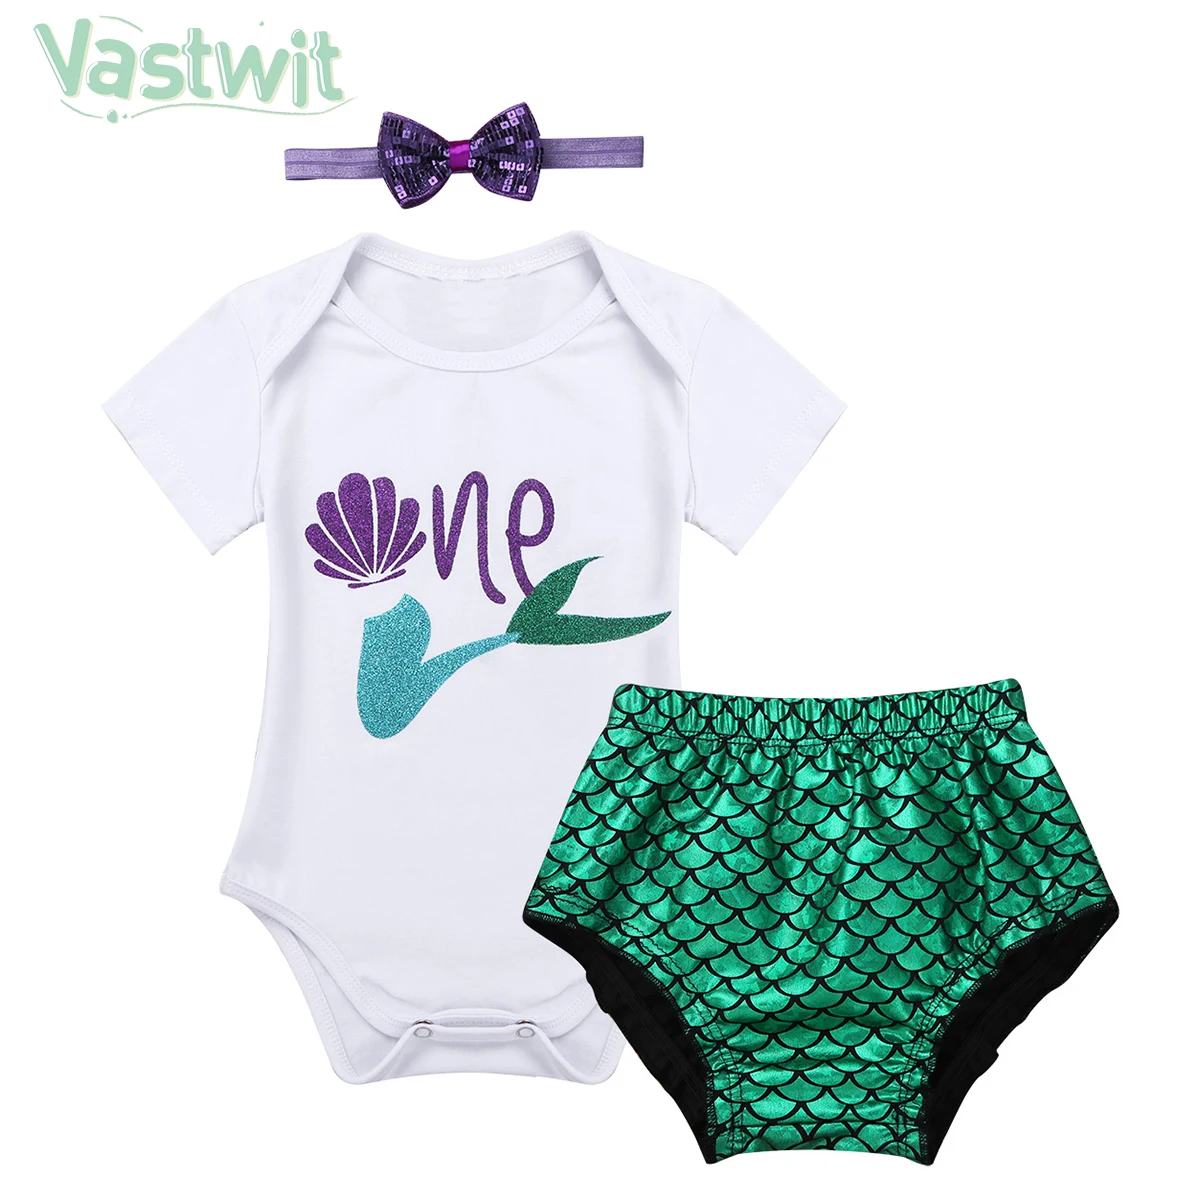 

Baby Girls One Year Dress Mermaid First 1st Birthday Outfit Summer Baby Girl Romper+Ruffle Party Tutu Bloomers 3pcs Clothing Set